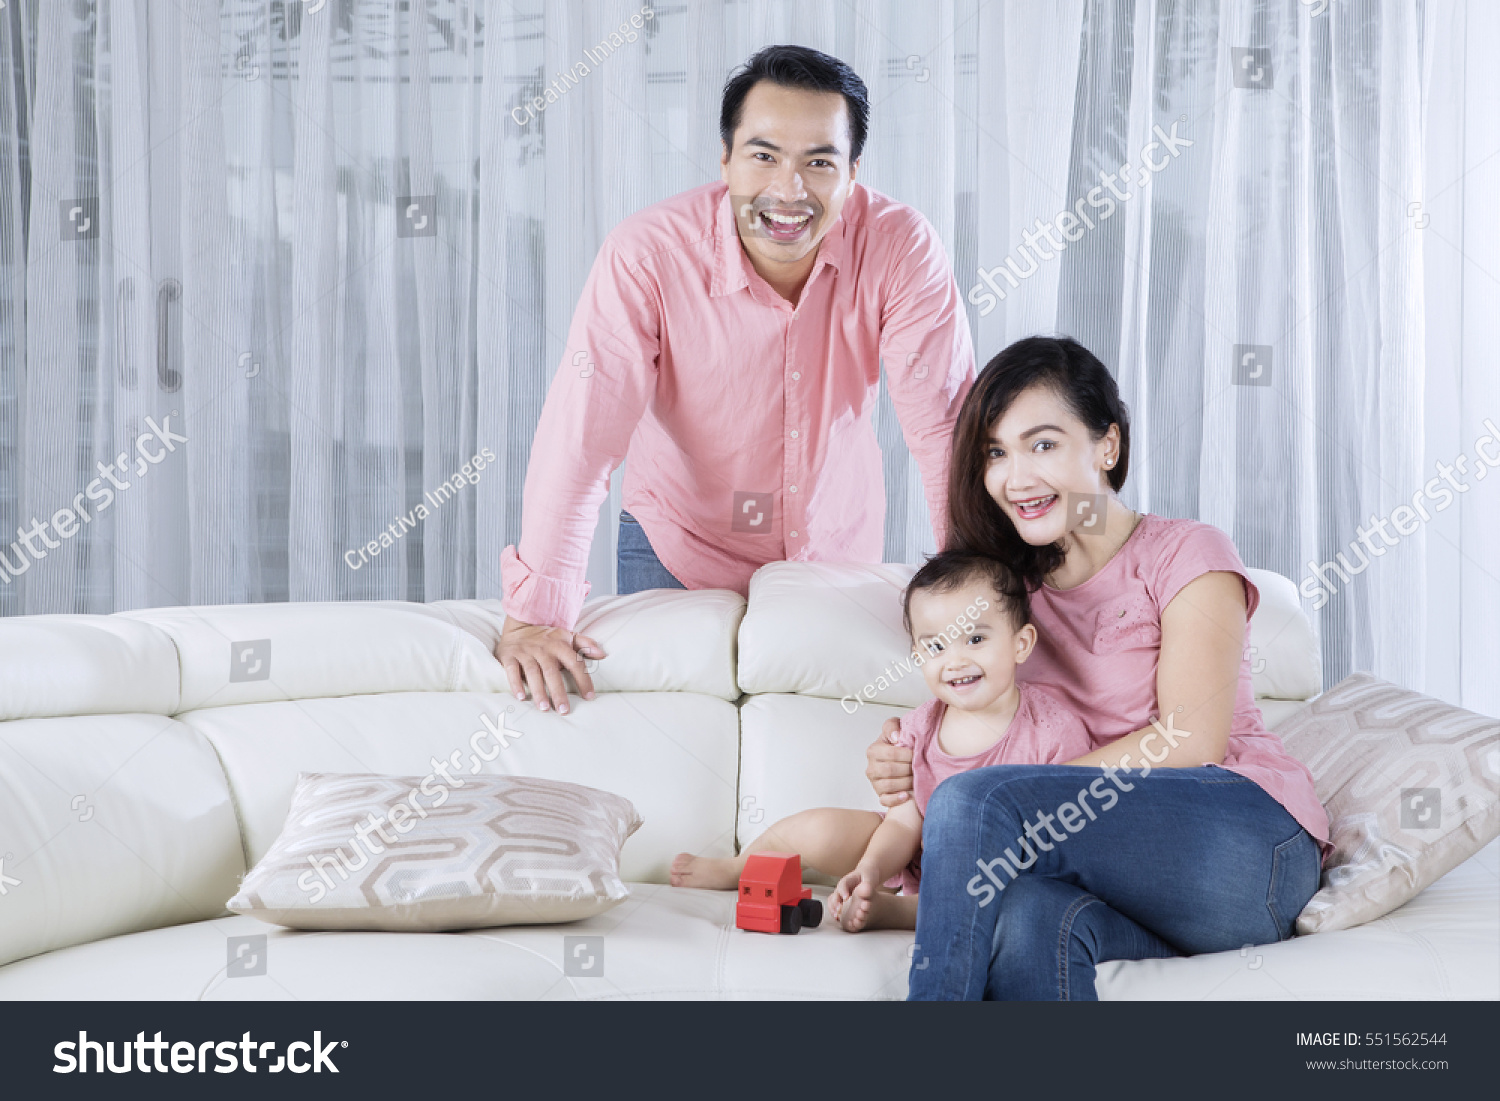 Image of happy family looking at the camera while sitting on the couch  #551562544